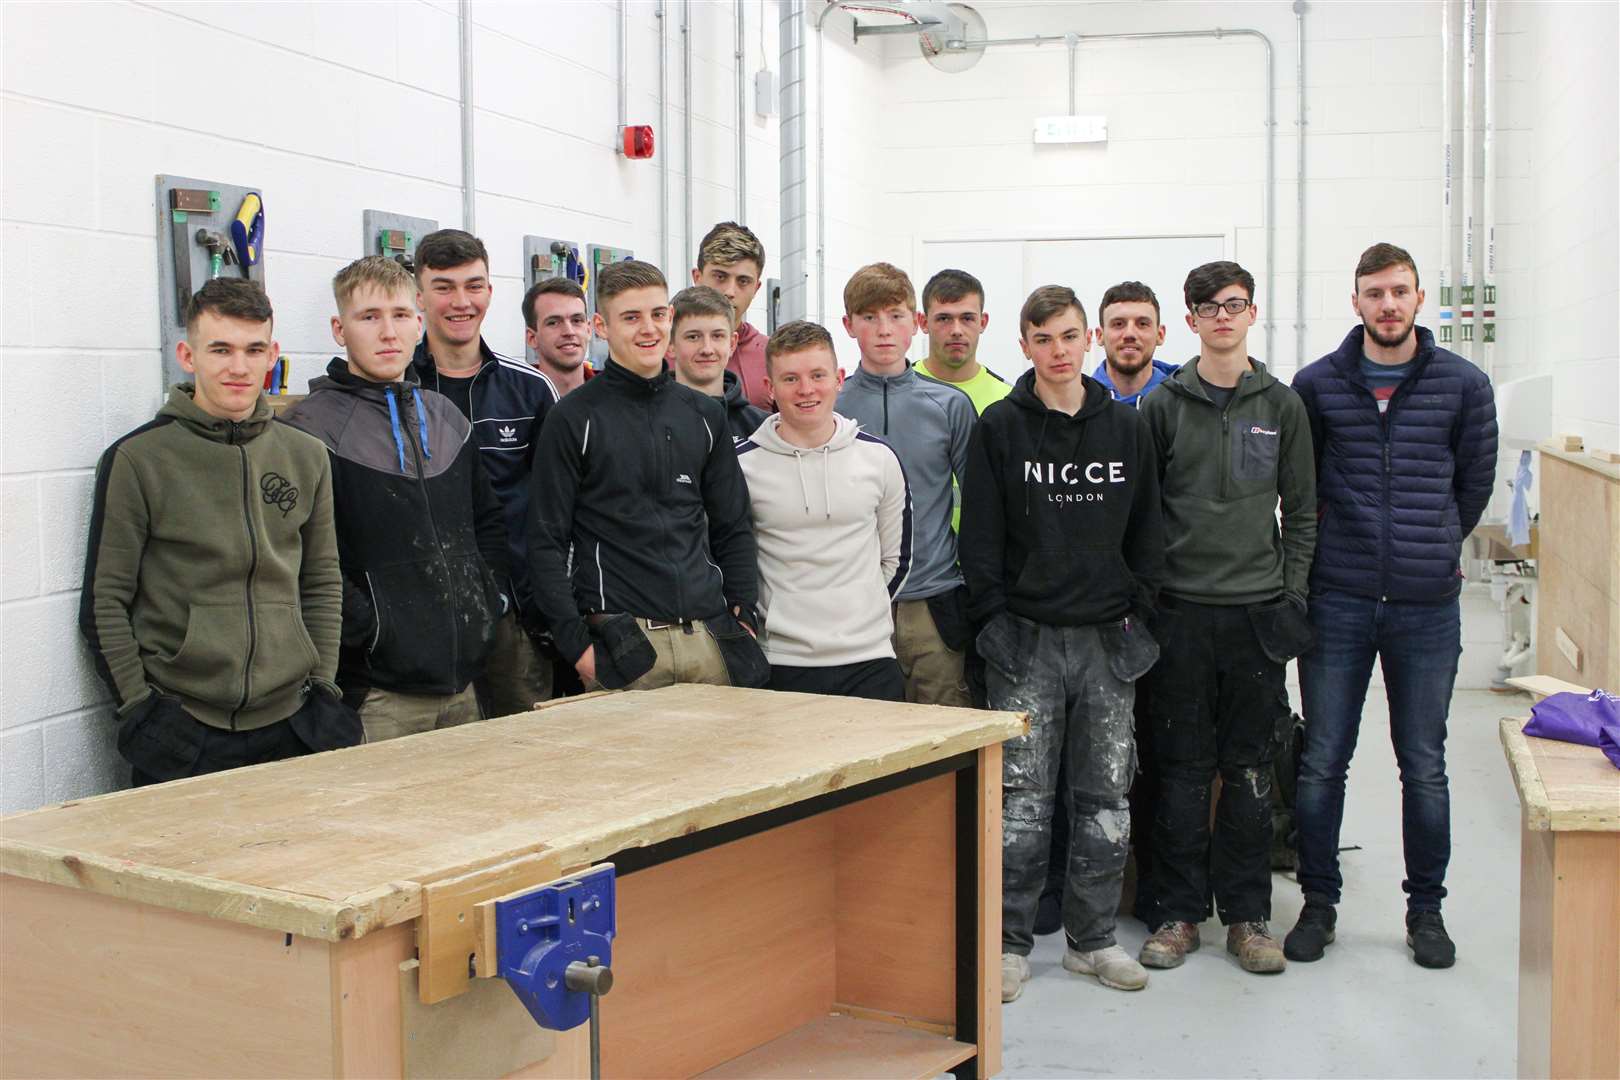 Modern apprentices with IBI Joiners, Inverness. The company has 14 construction modern apprentices with Inverness College UHI, including joiners, painters and decorators and a built environment apprentice.